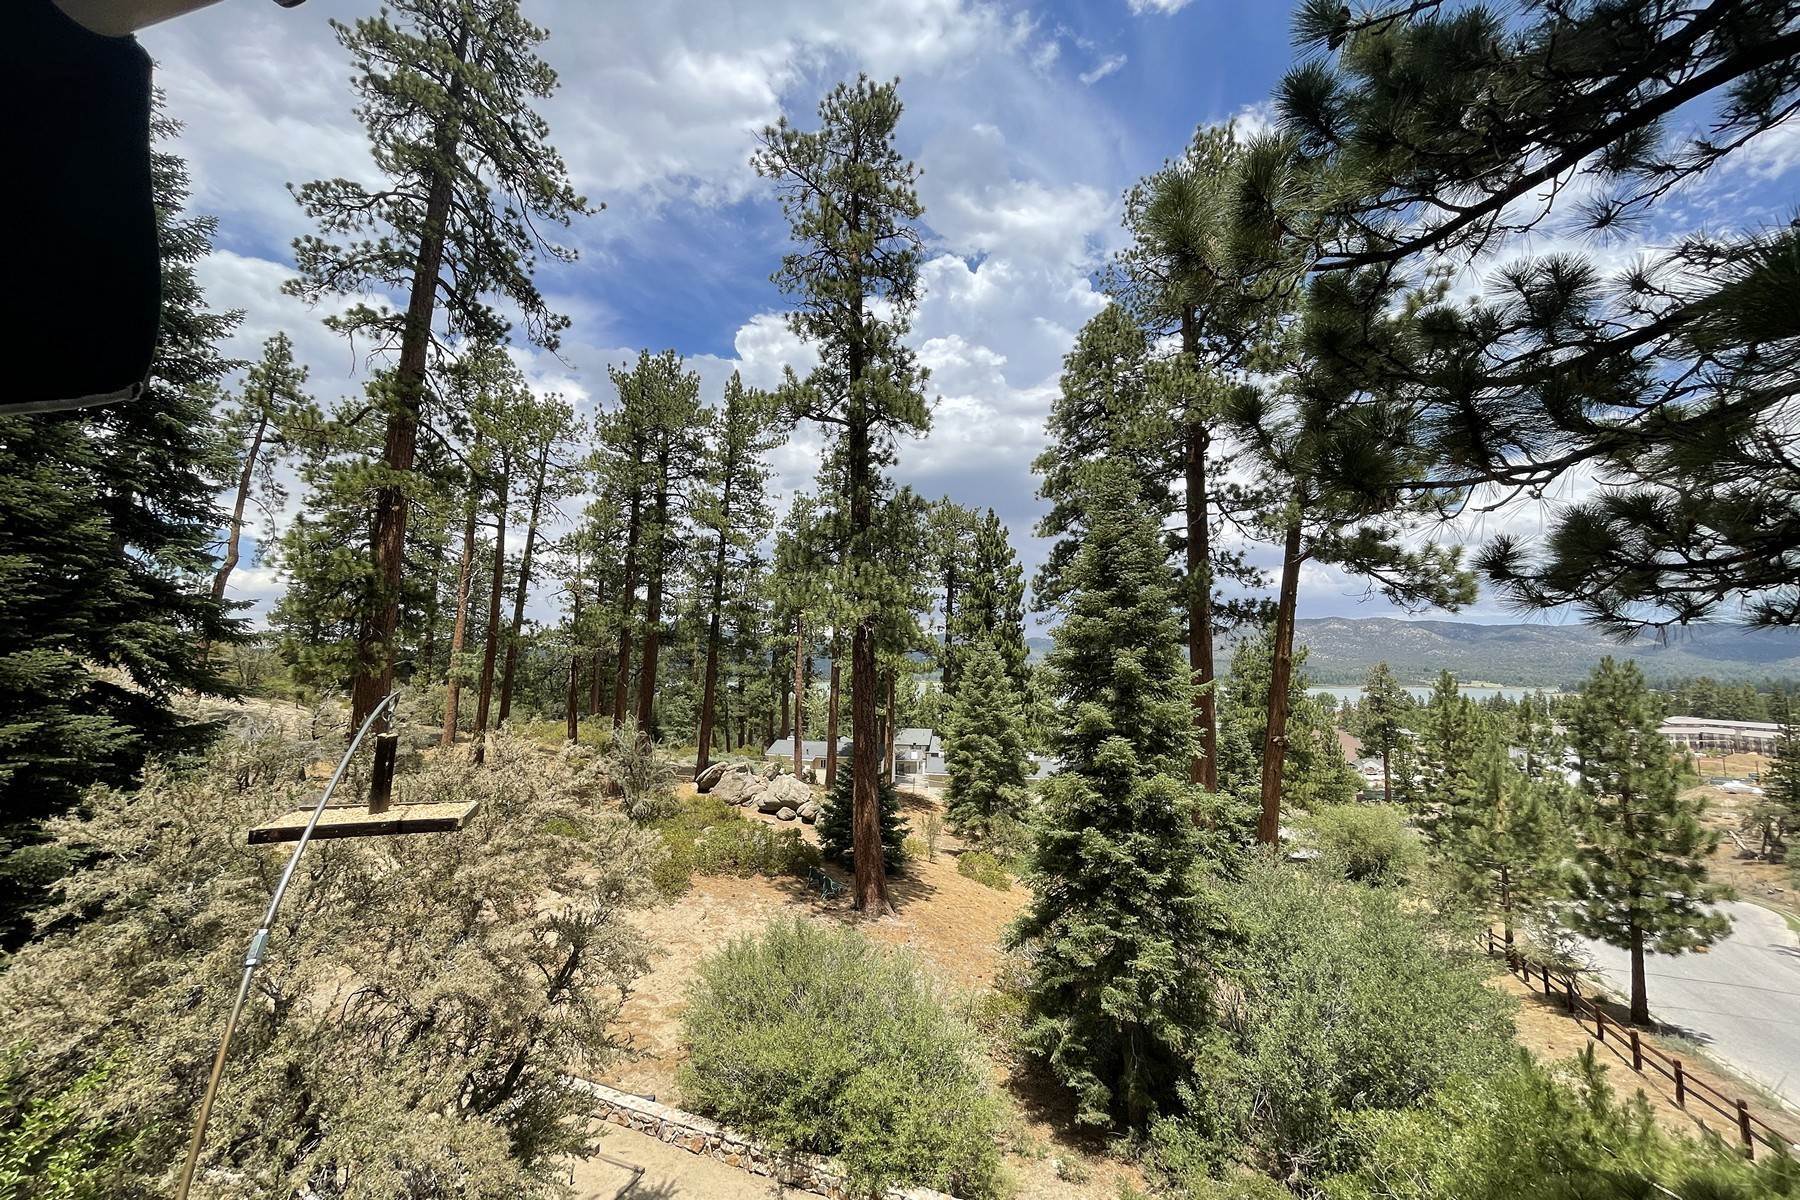 Land for Sale at 748 Paine Road, Big Bear Lake, CA 92315 748 Paine Road Big Bear Lake, California 92315 United States